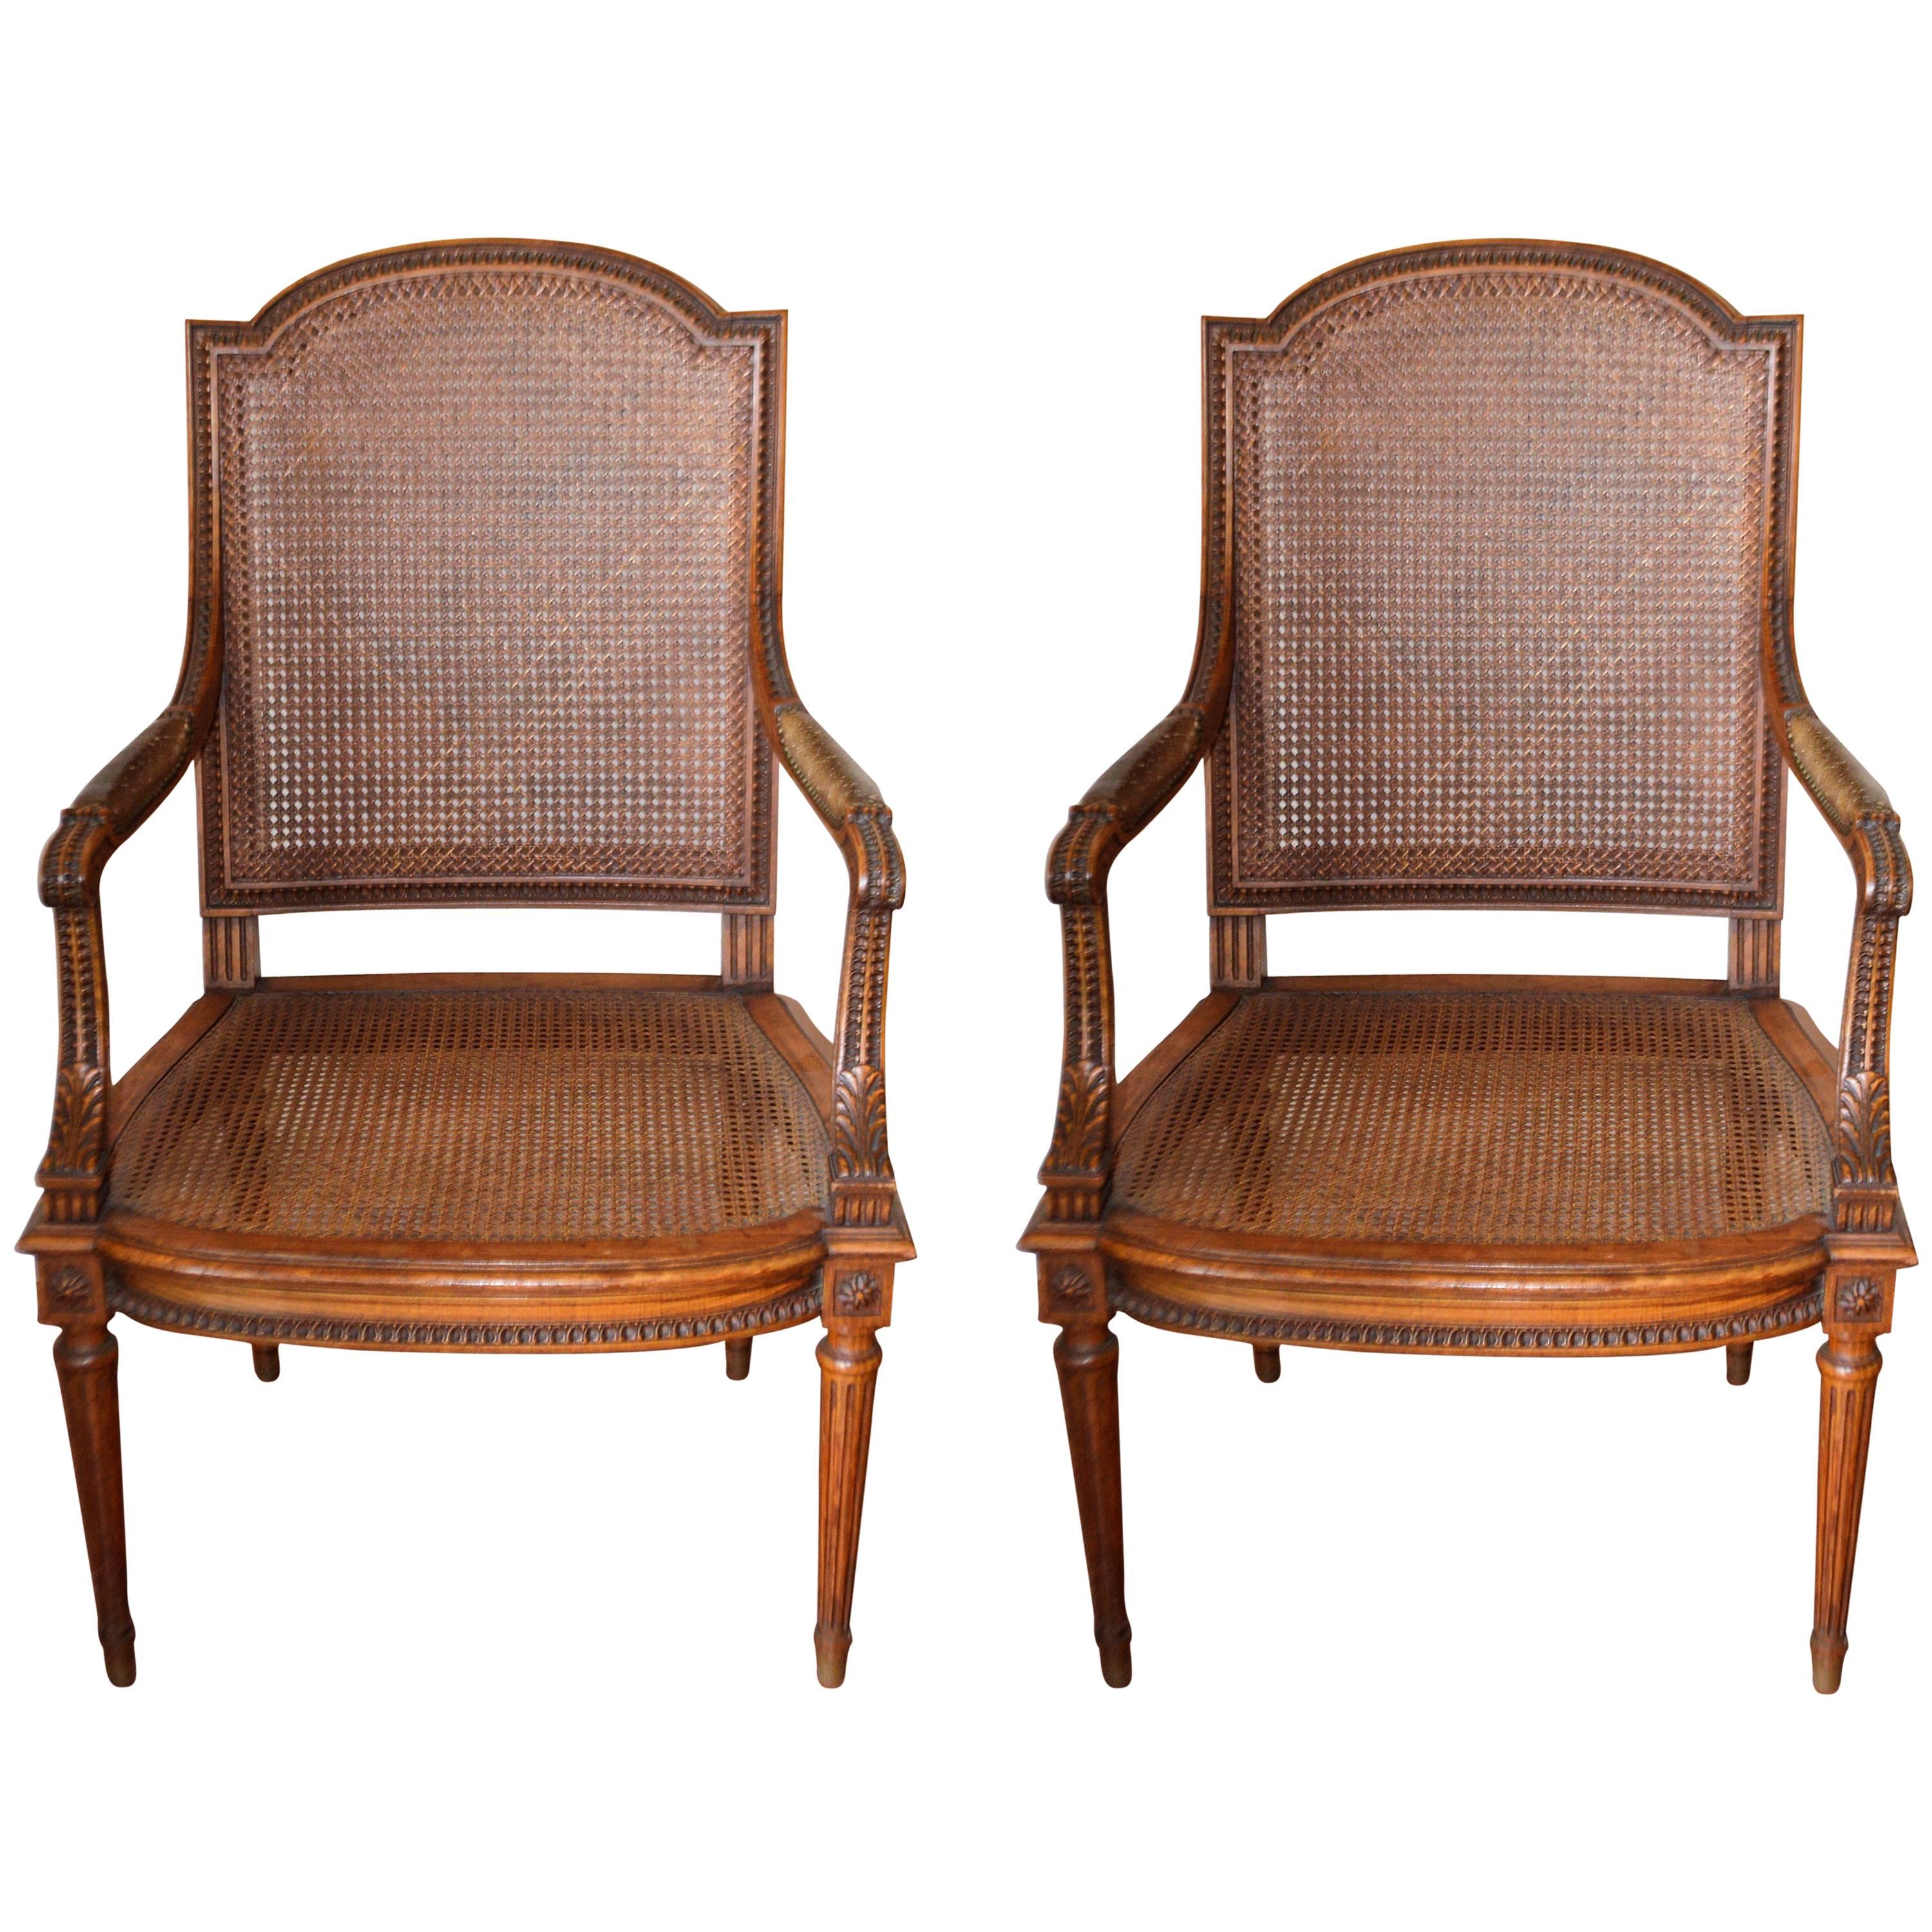 Pair of Louis XVI Style Hand-Caned and Carved Mahogany Armchairs with Leather